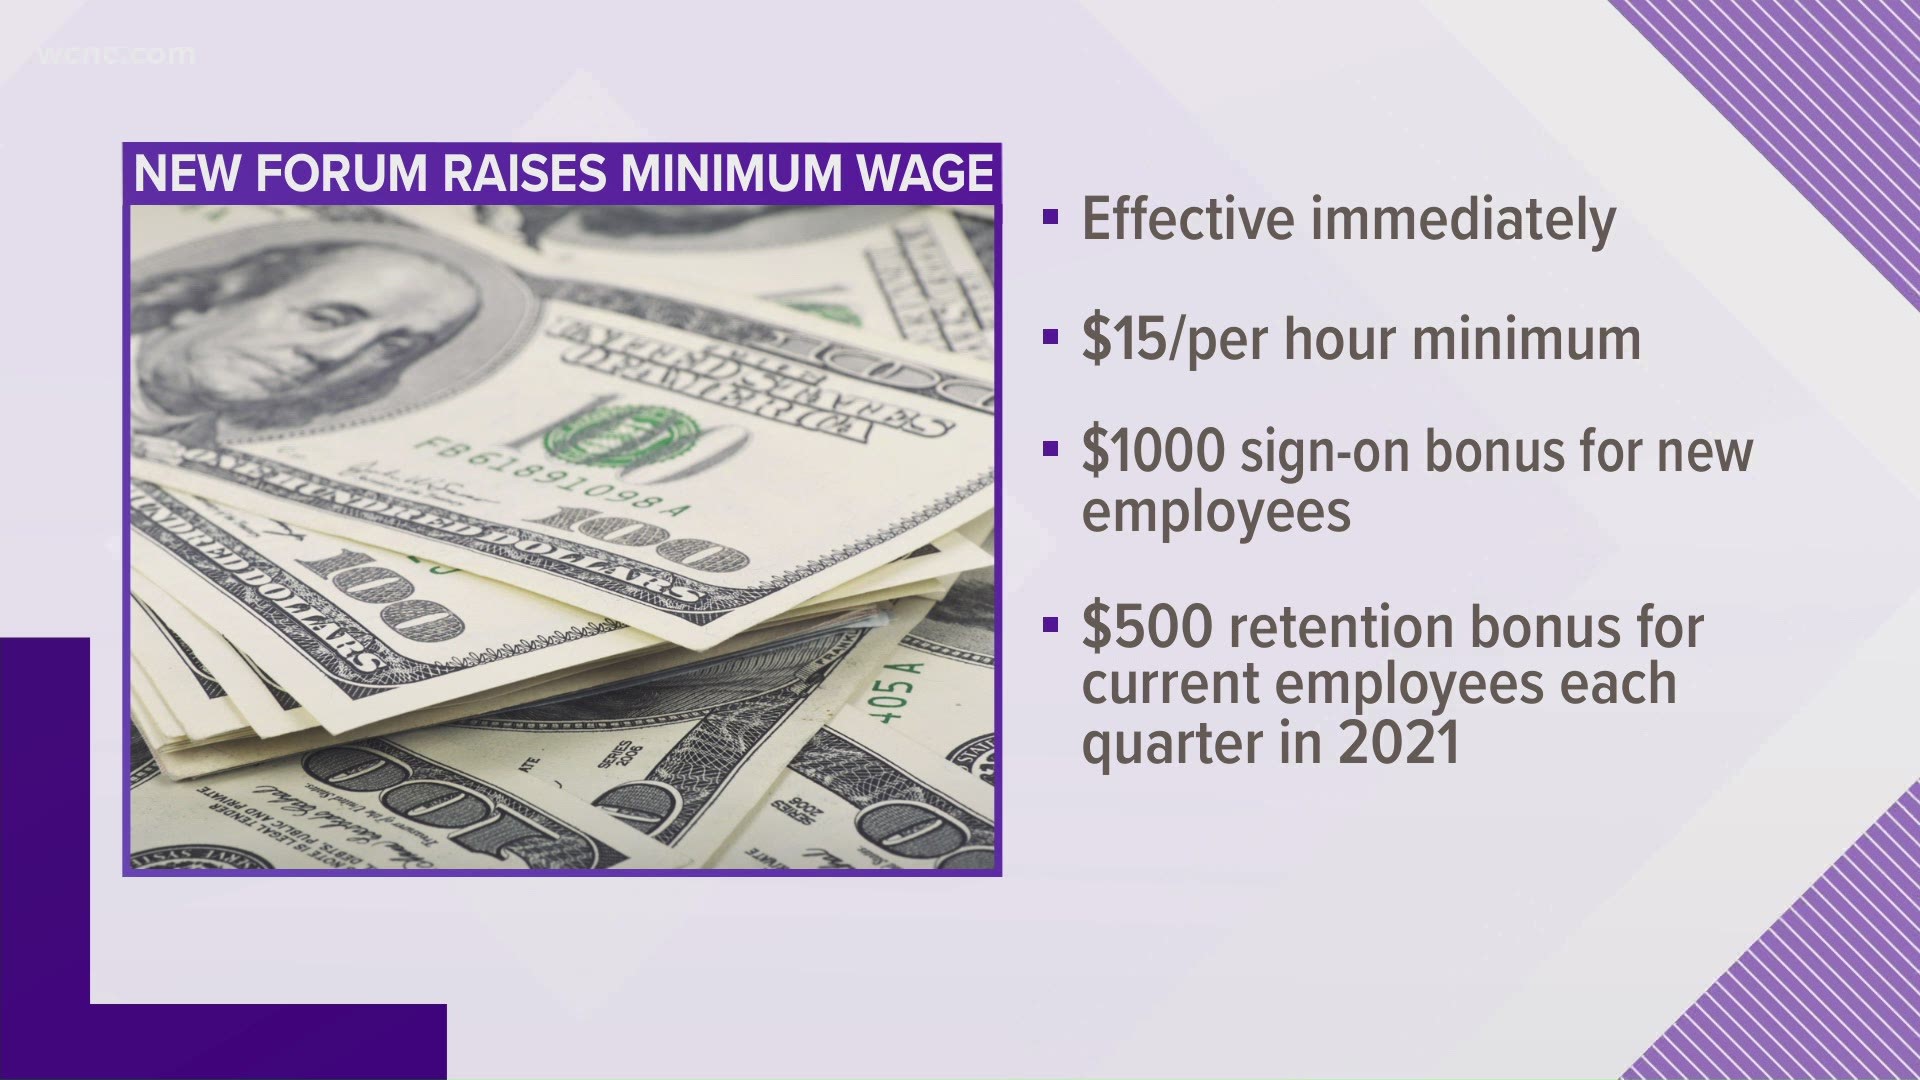 The company announced a $15 an hour increase along with additional “perks”.